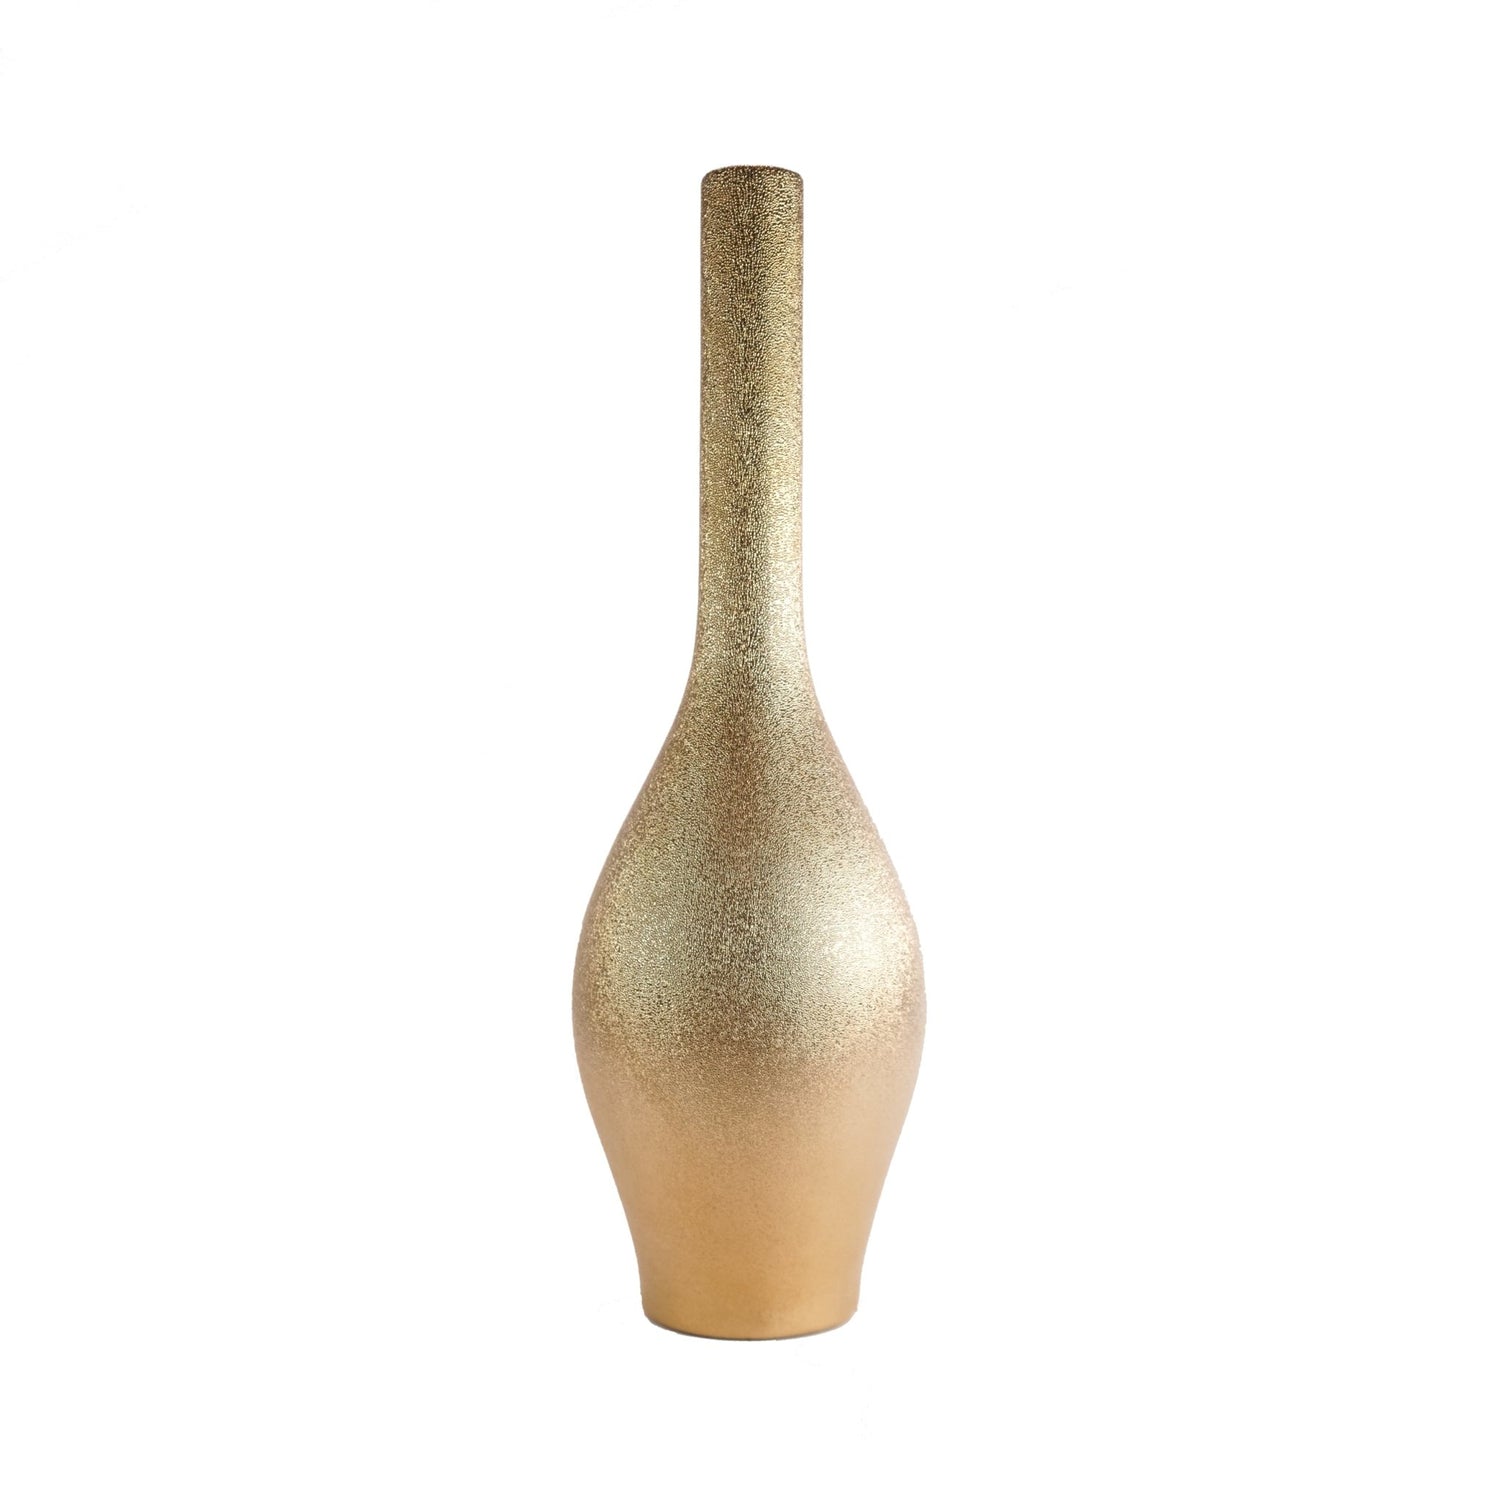 Long Golden Vase - Sirdab - Unknown